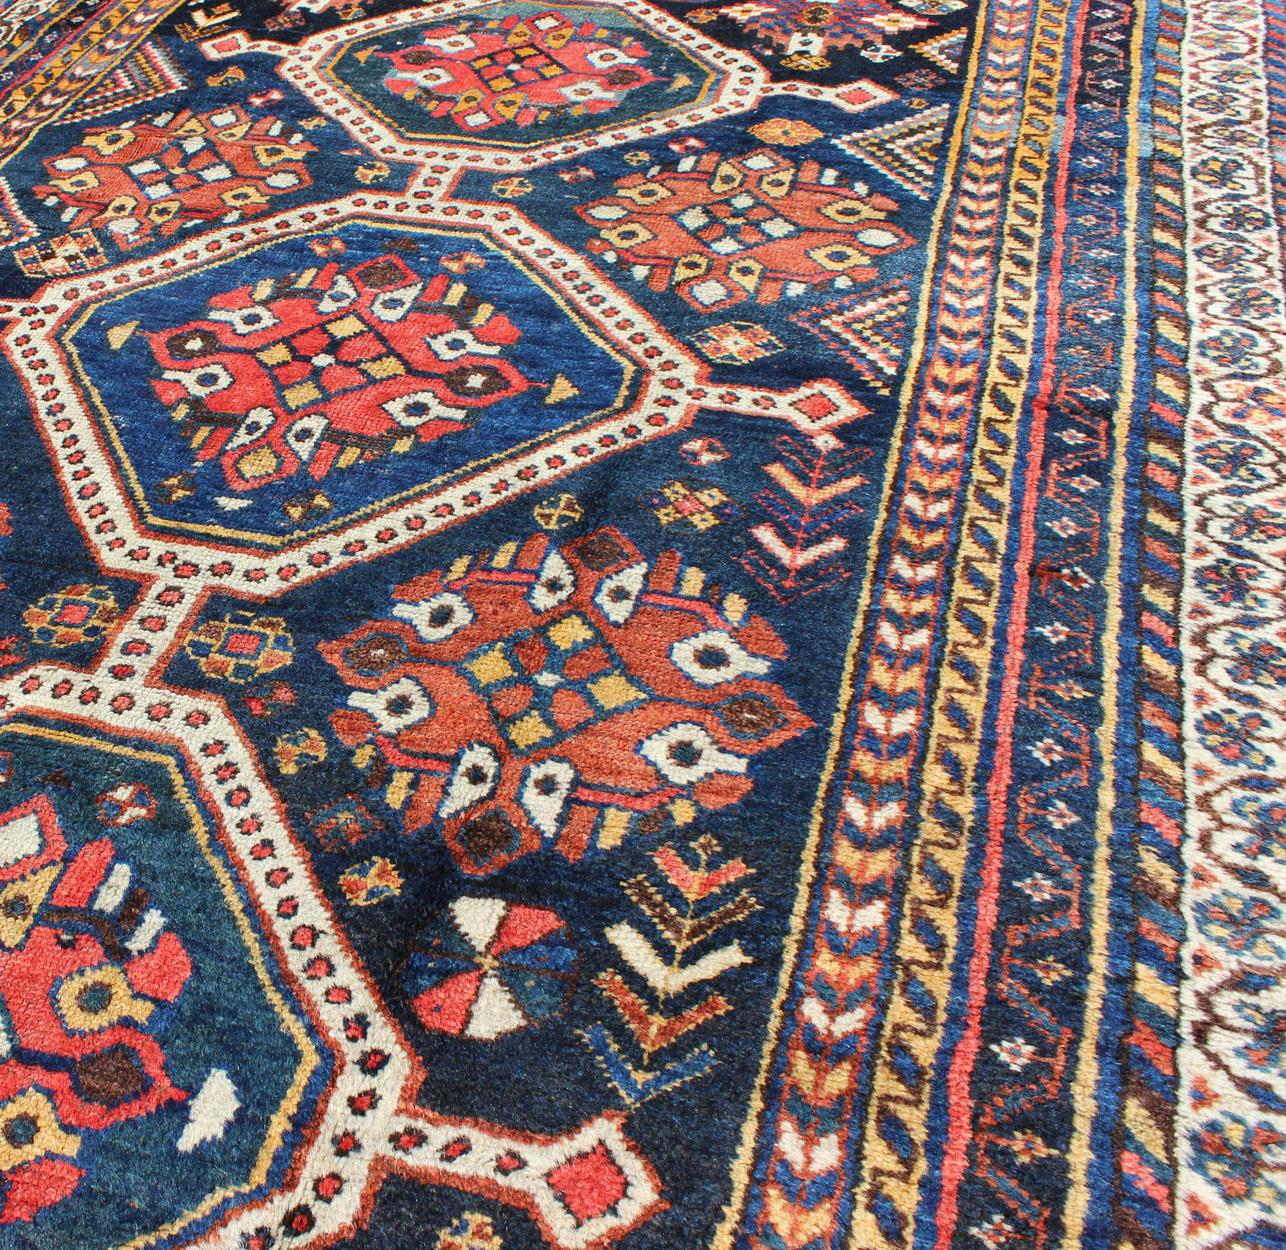 Antique Persian Qashqai Rug with Four-Medallion Design in Blue, Red, Brown Tones For Sale 1